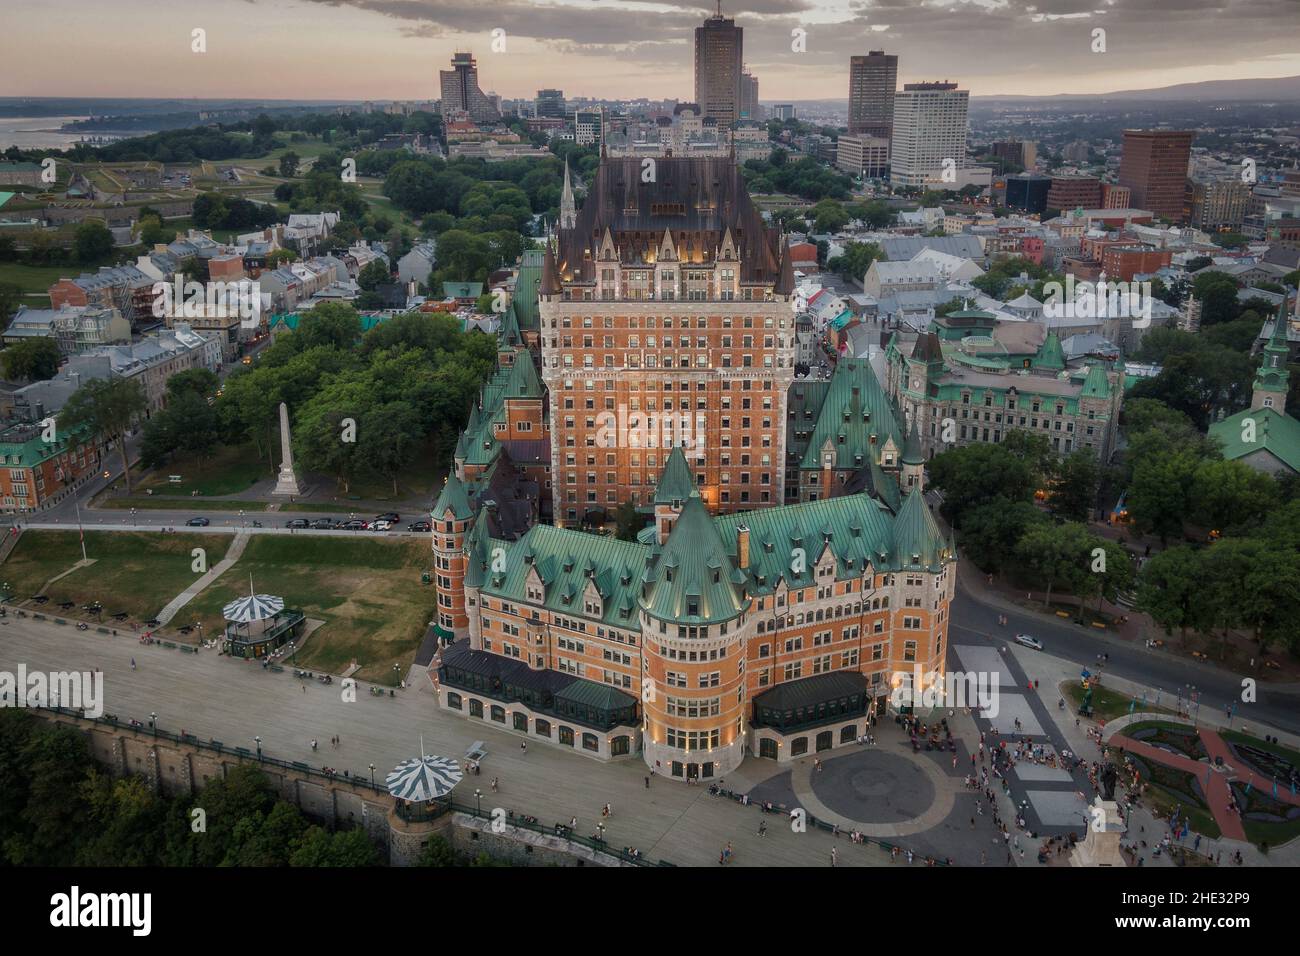 Aerial view of historical landmark Frontenac castle at dusk in Quebec City, Canada. Stock Photo